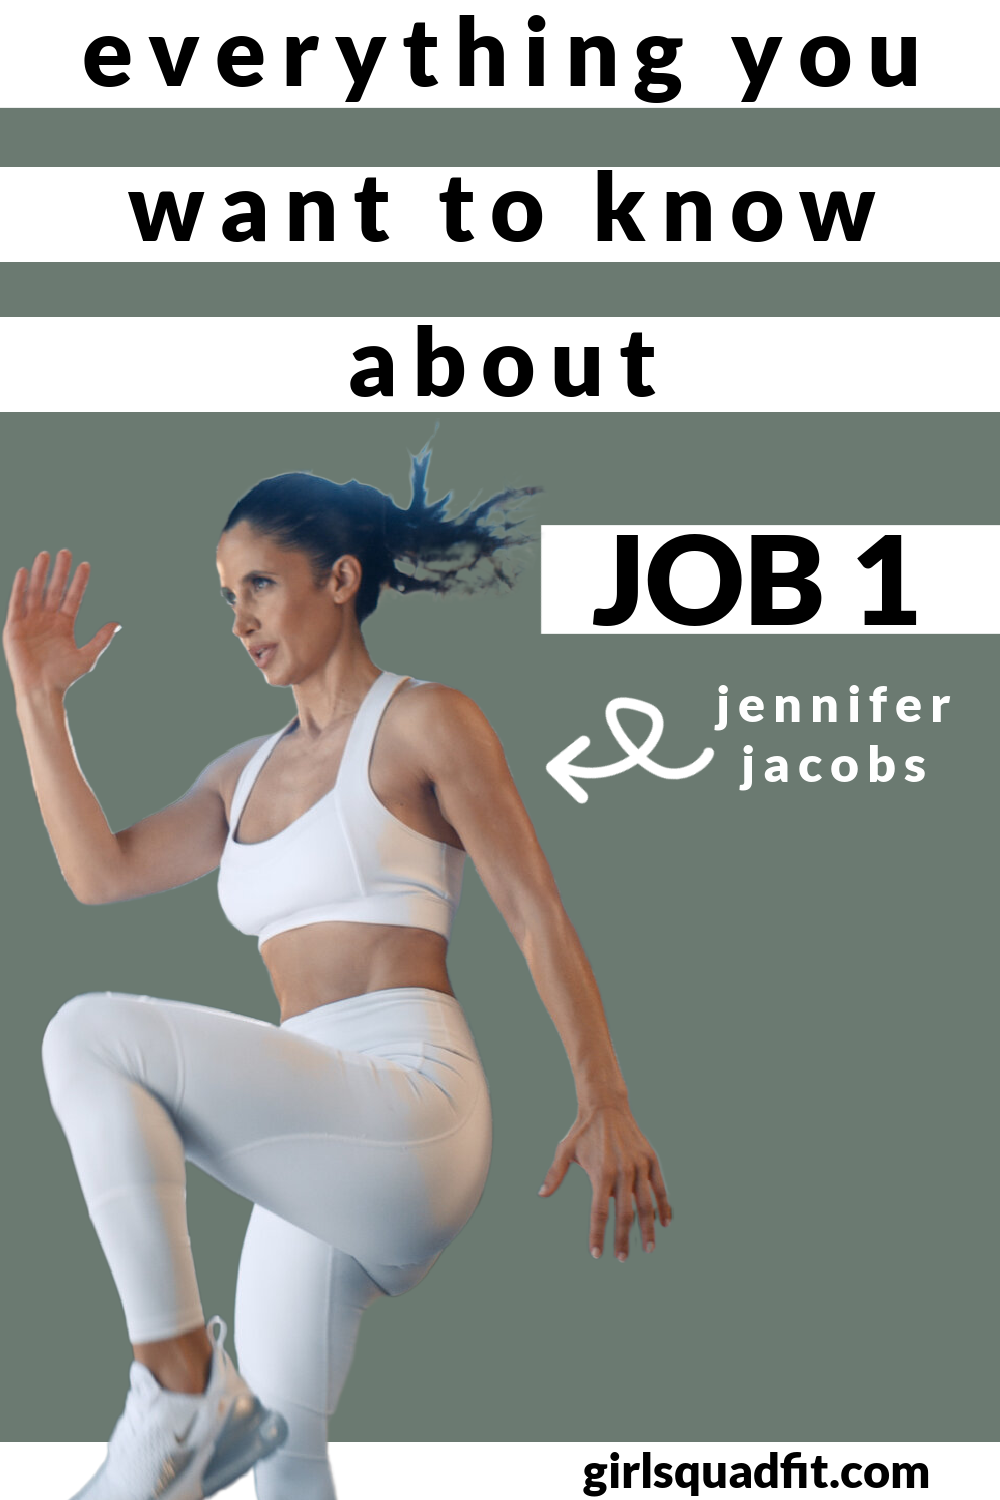 Everything You Want To Know About Job 1 By Jennifer Jacobs — Girl Squad Fit